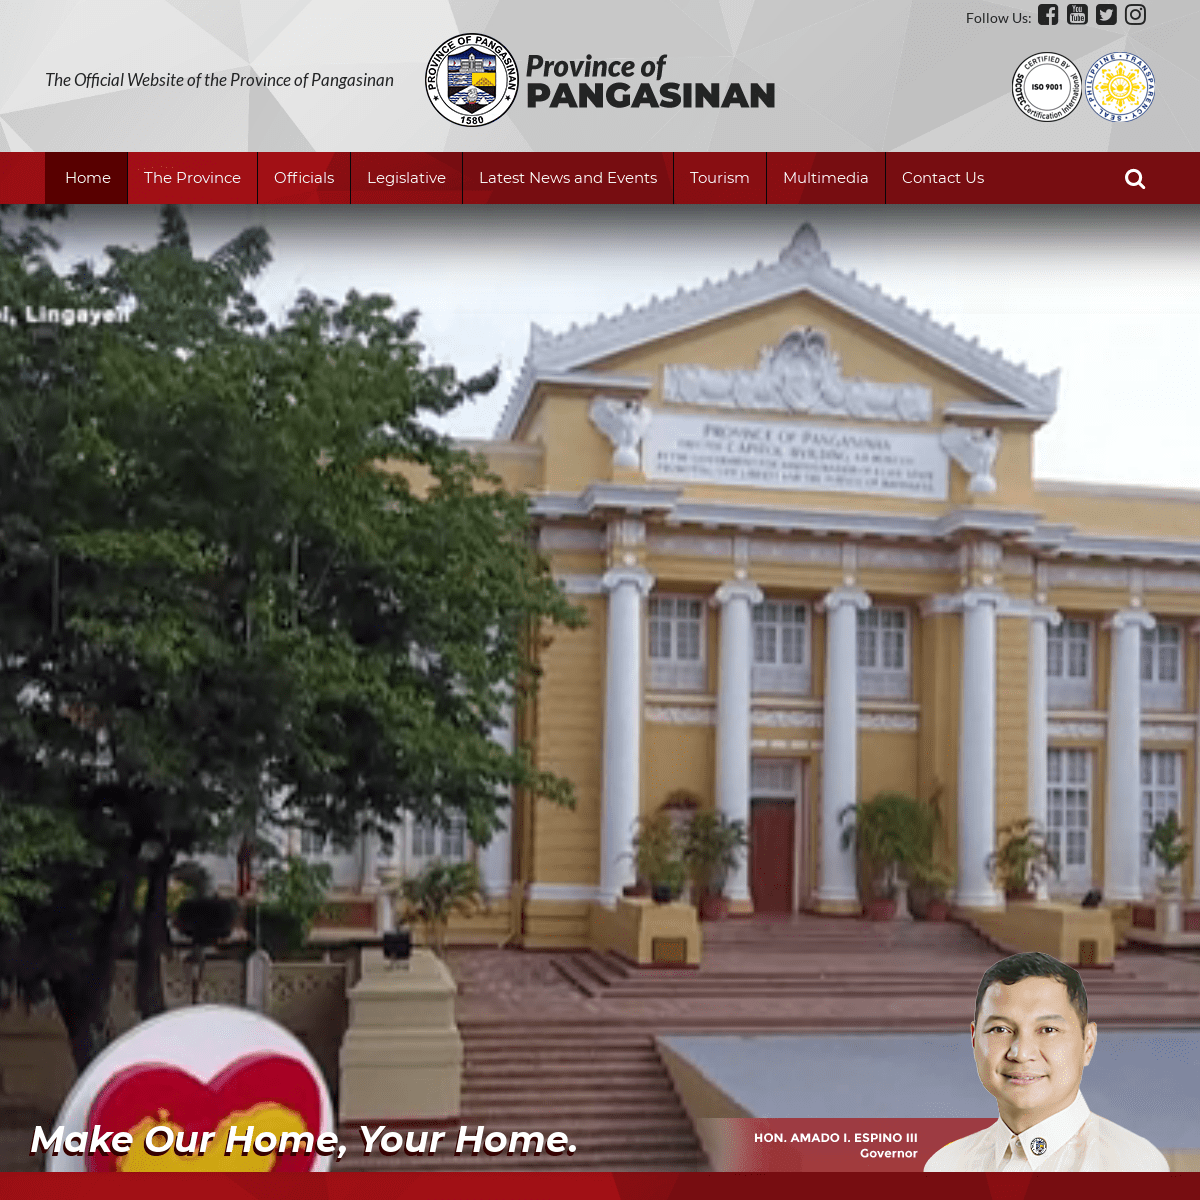 Home - The Official Website of the Province of Pangasinan